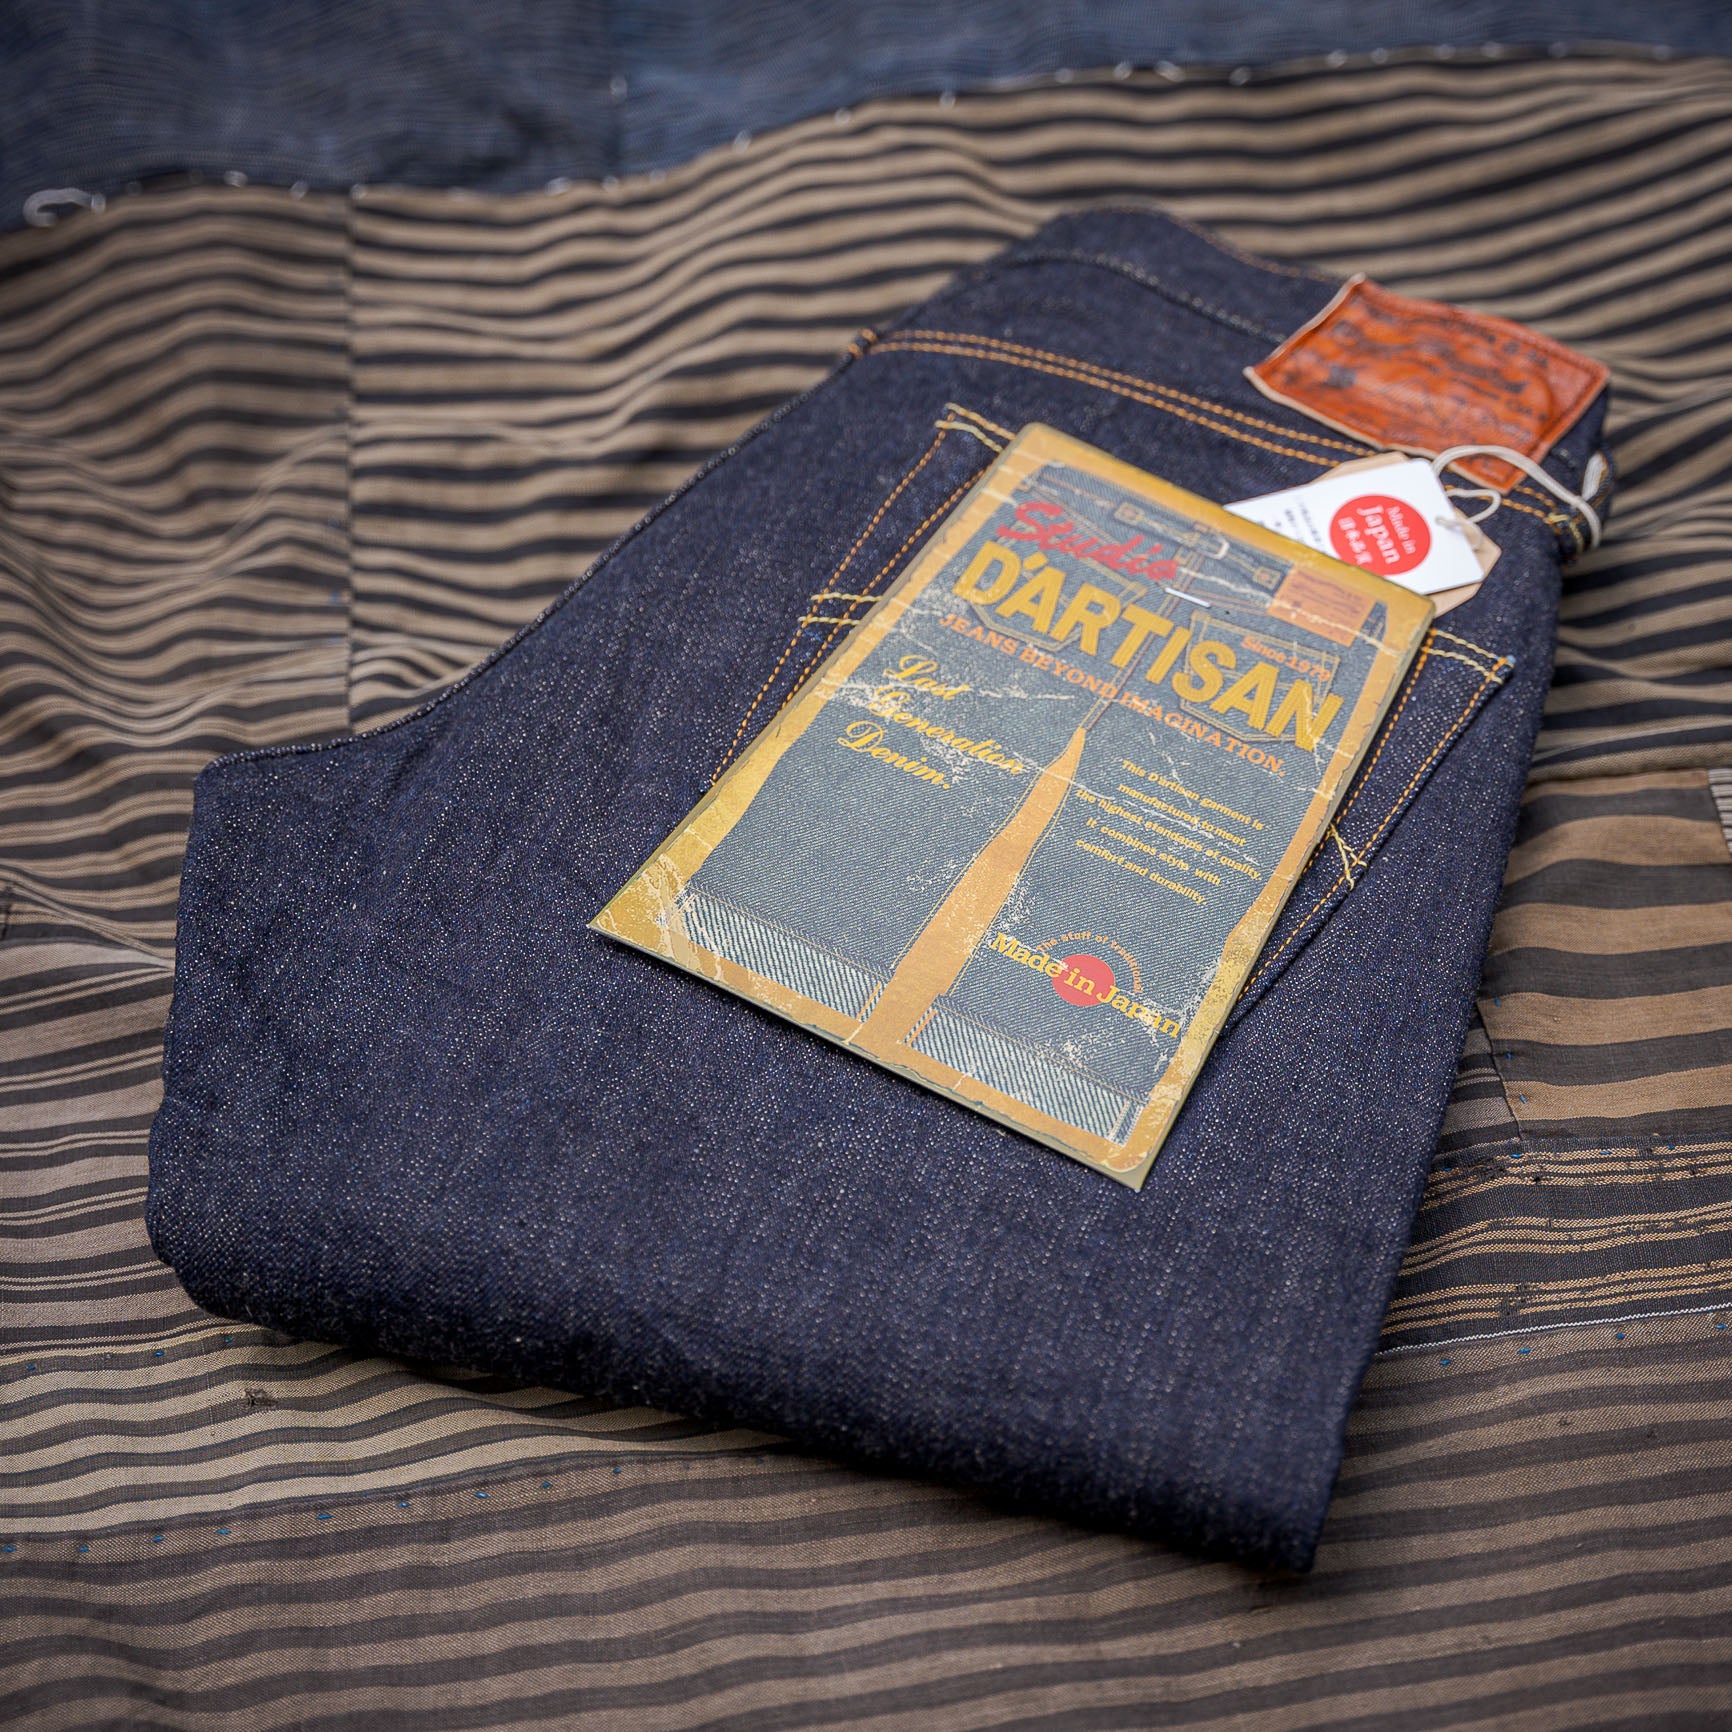 Studio D'artisan SD-908 14oz G3 Selvage Jeans – Relaxed Tapered